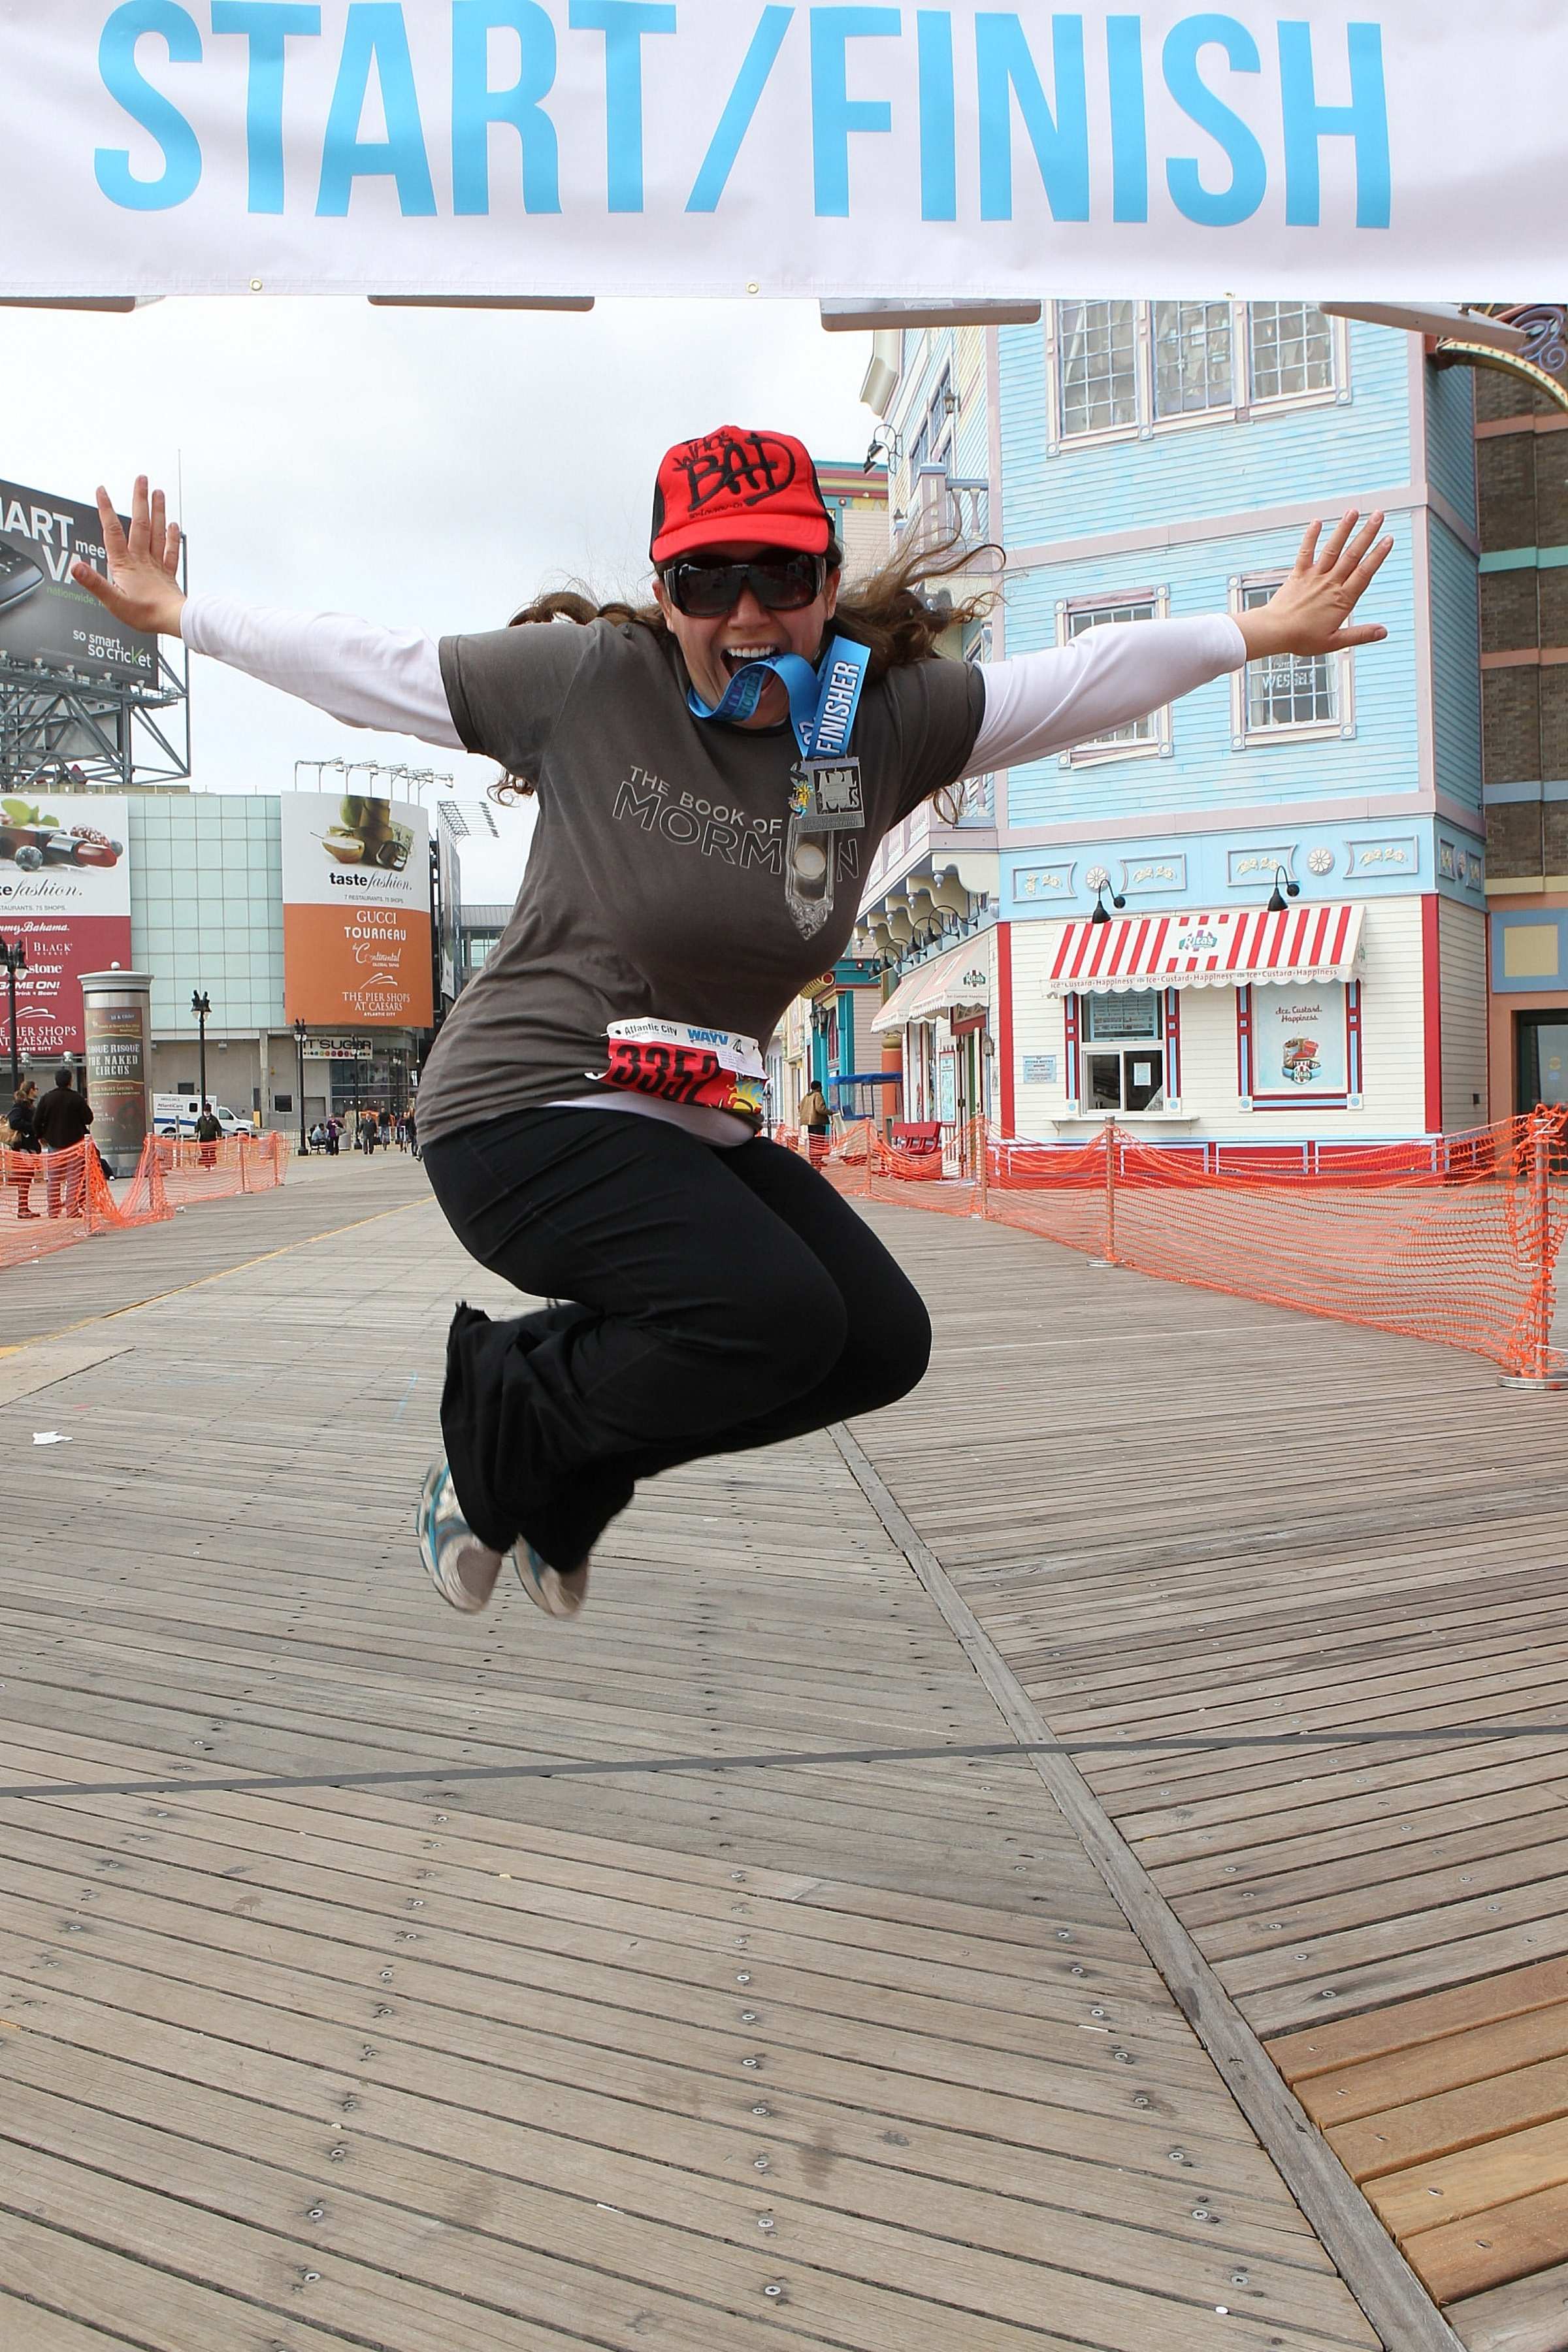 Aurora De Lucia jumping in the air after the finish of the Atlantic City race